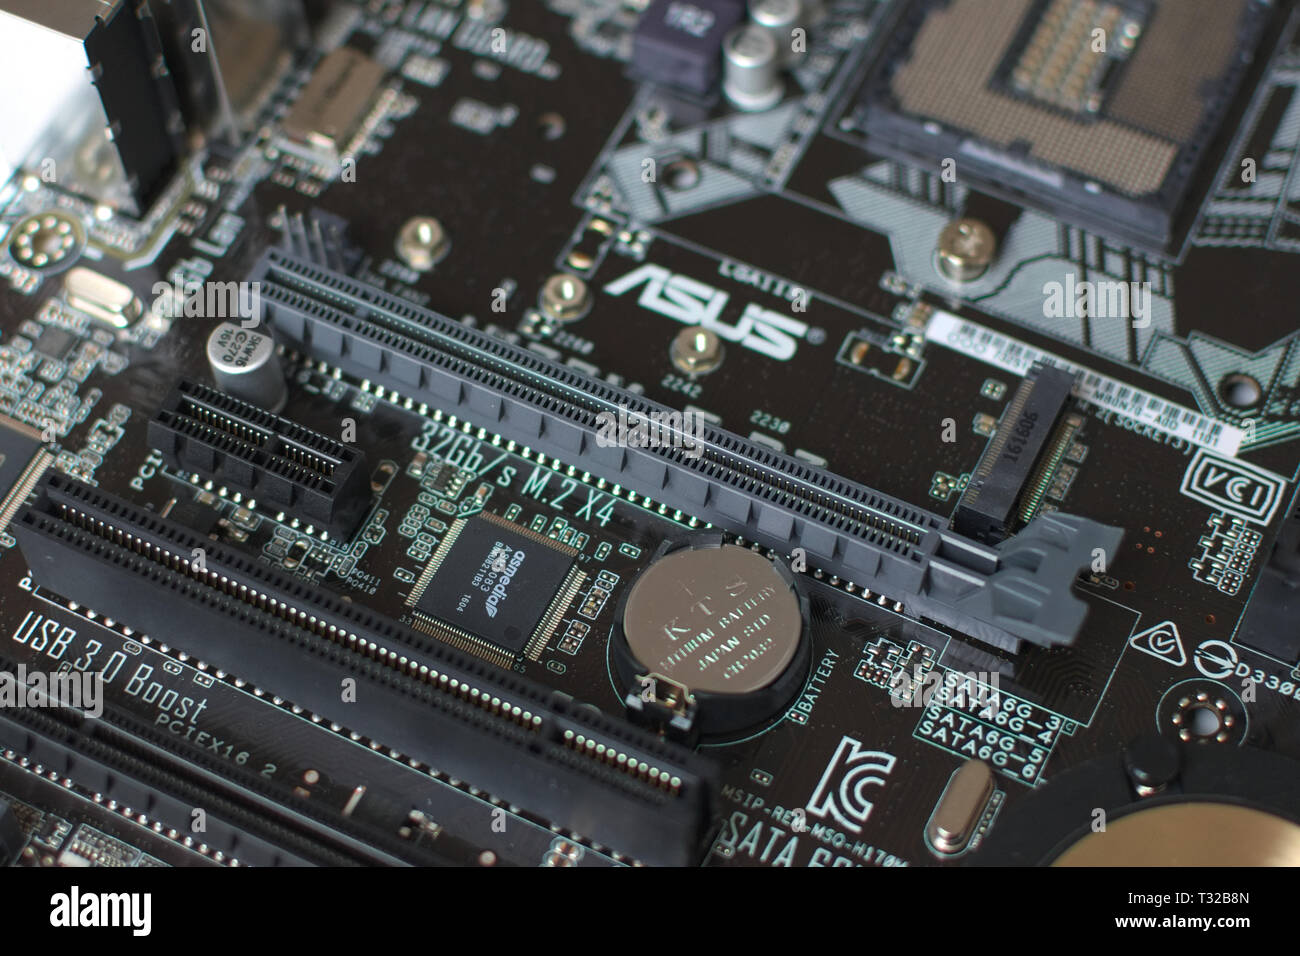 Modern computer ATX format motherboard. Electronic components, sockets and soldering points can be clearly seen. Stock Photo